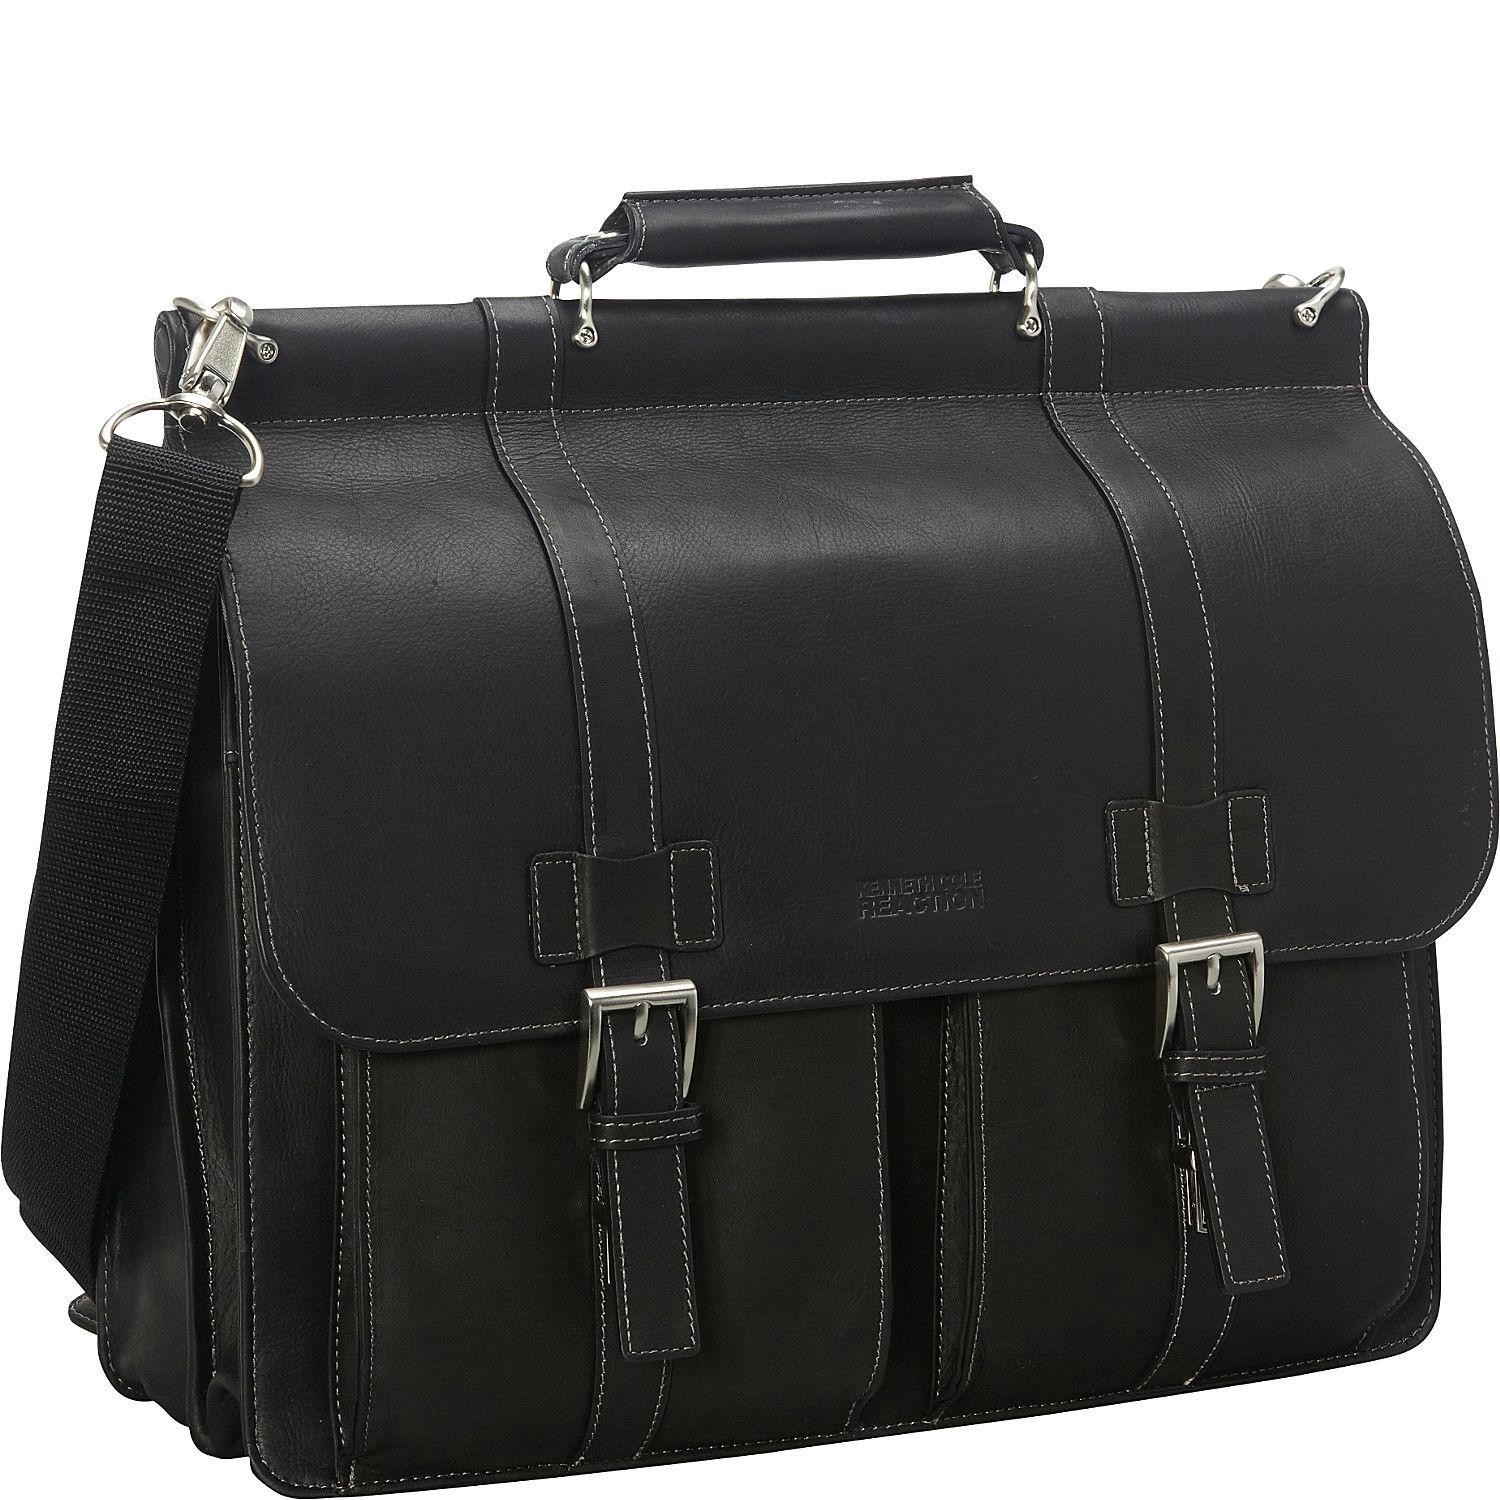 Laptop Bags and Briefcases | Luggage Pros